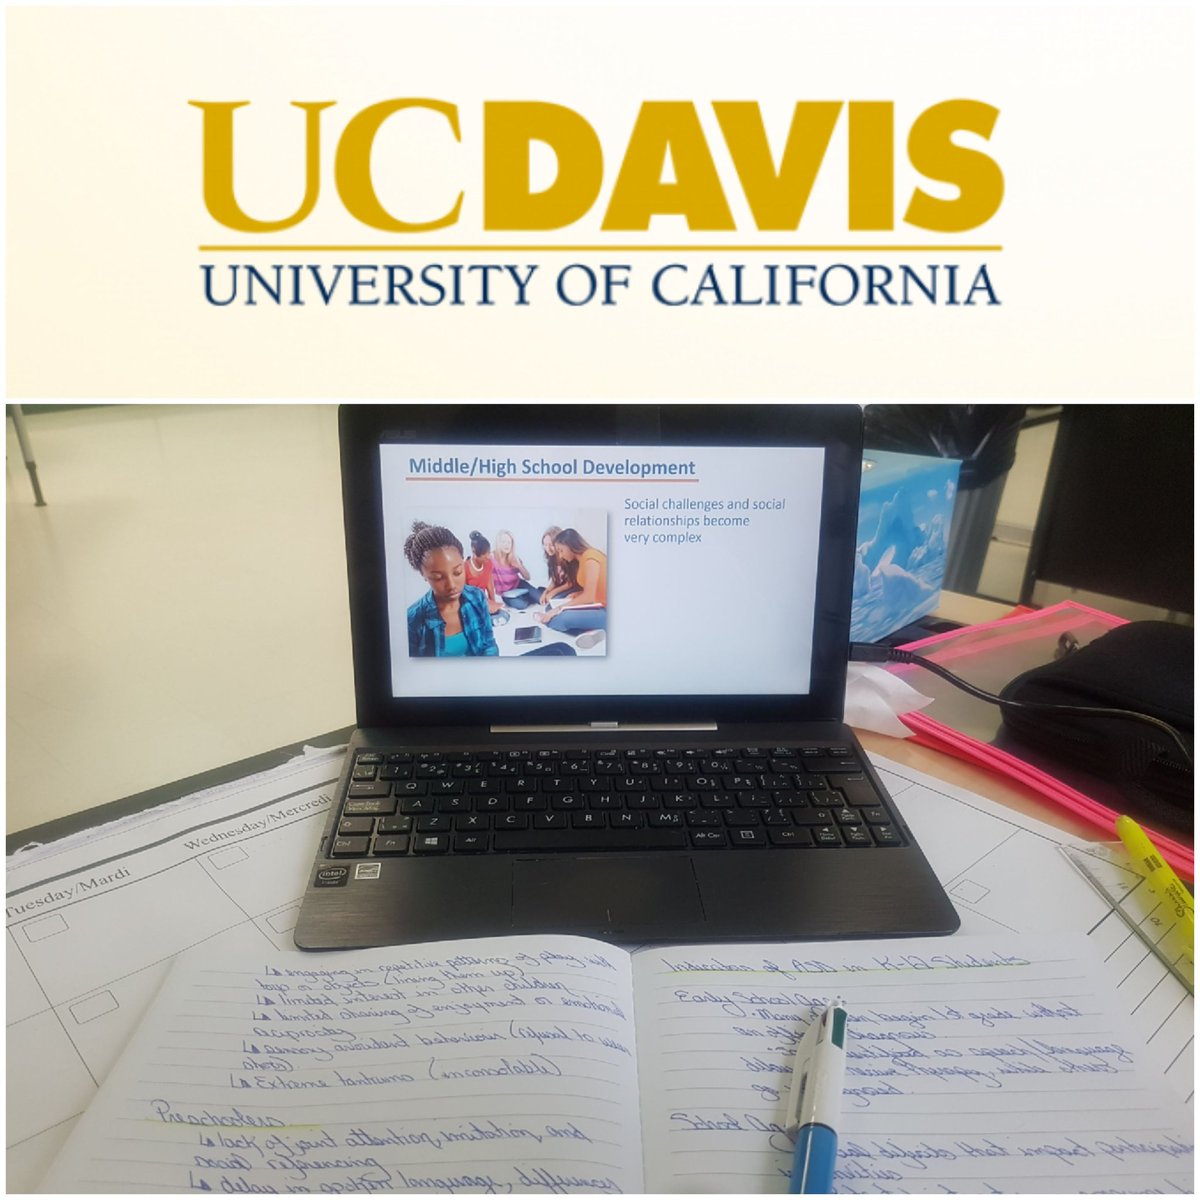 Taking time to do some professional development at school and at home. Online learning is not just for our students #FMPSDLearningAtHome
#ABLearningAtHome
 #only26morehourstogo #ucdavis #autismspectrumdisorder #ilovemyjob #kidsareworthit #kidsmentalhealthmatters